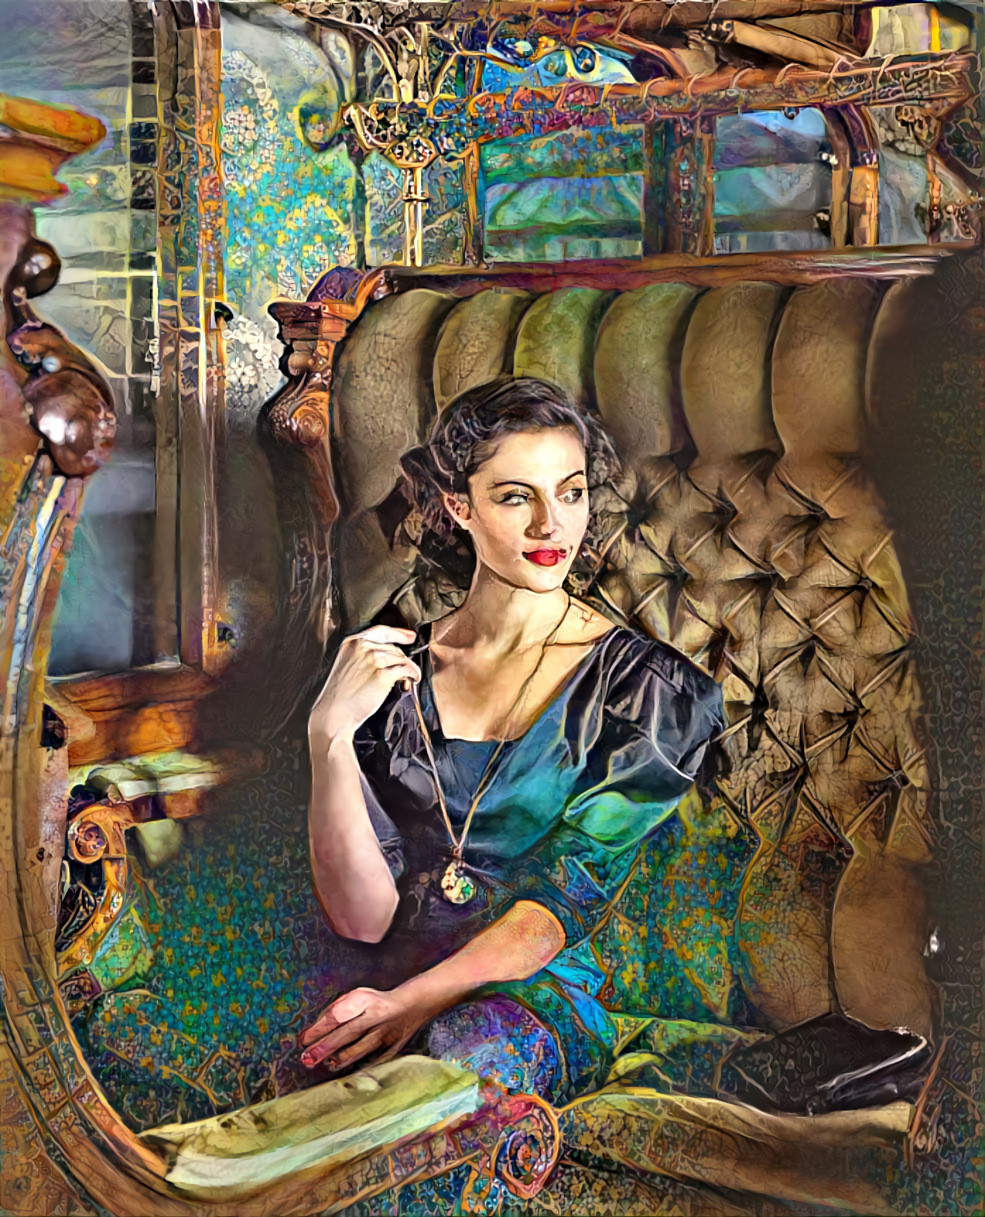 An elegant lady on the Orient Express